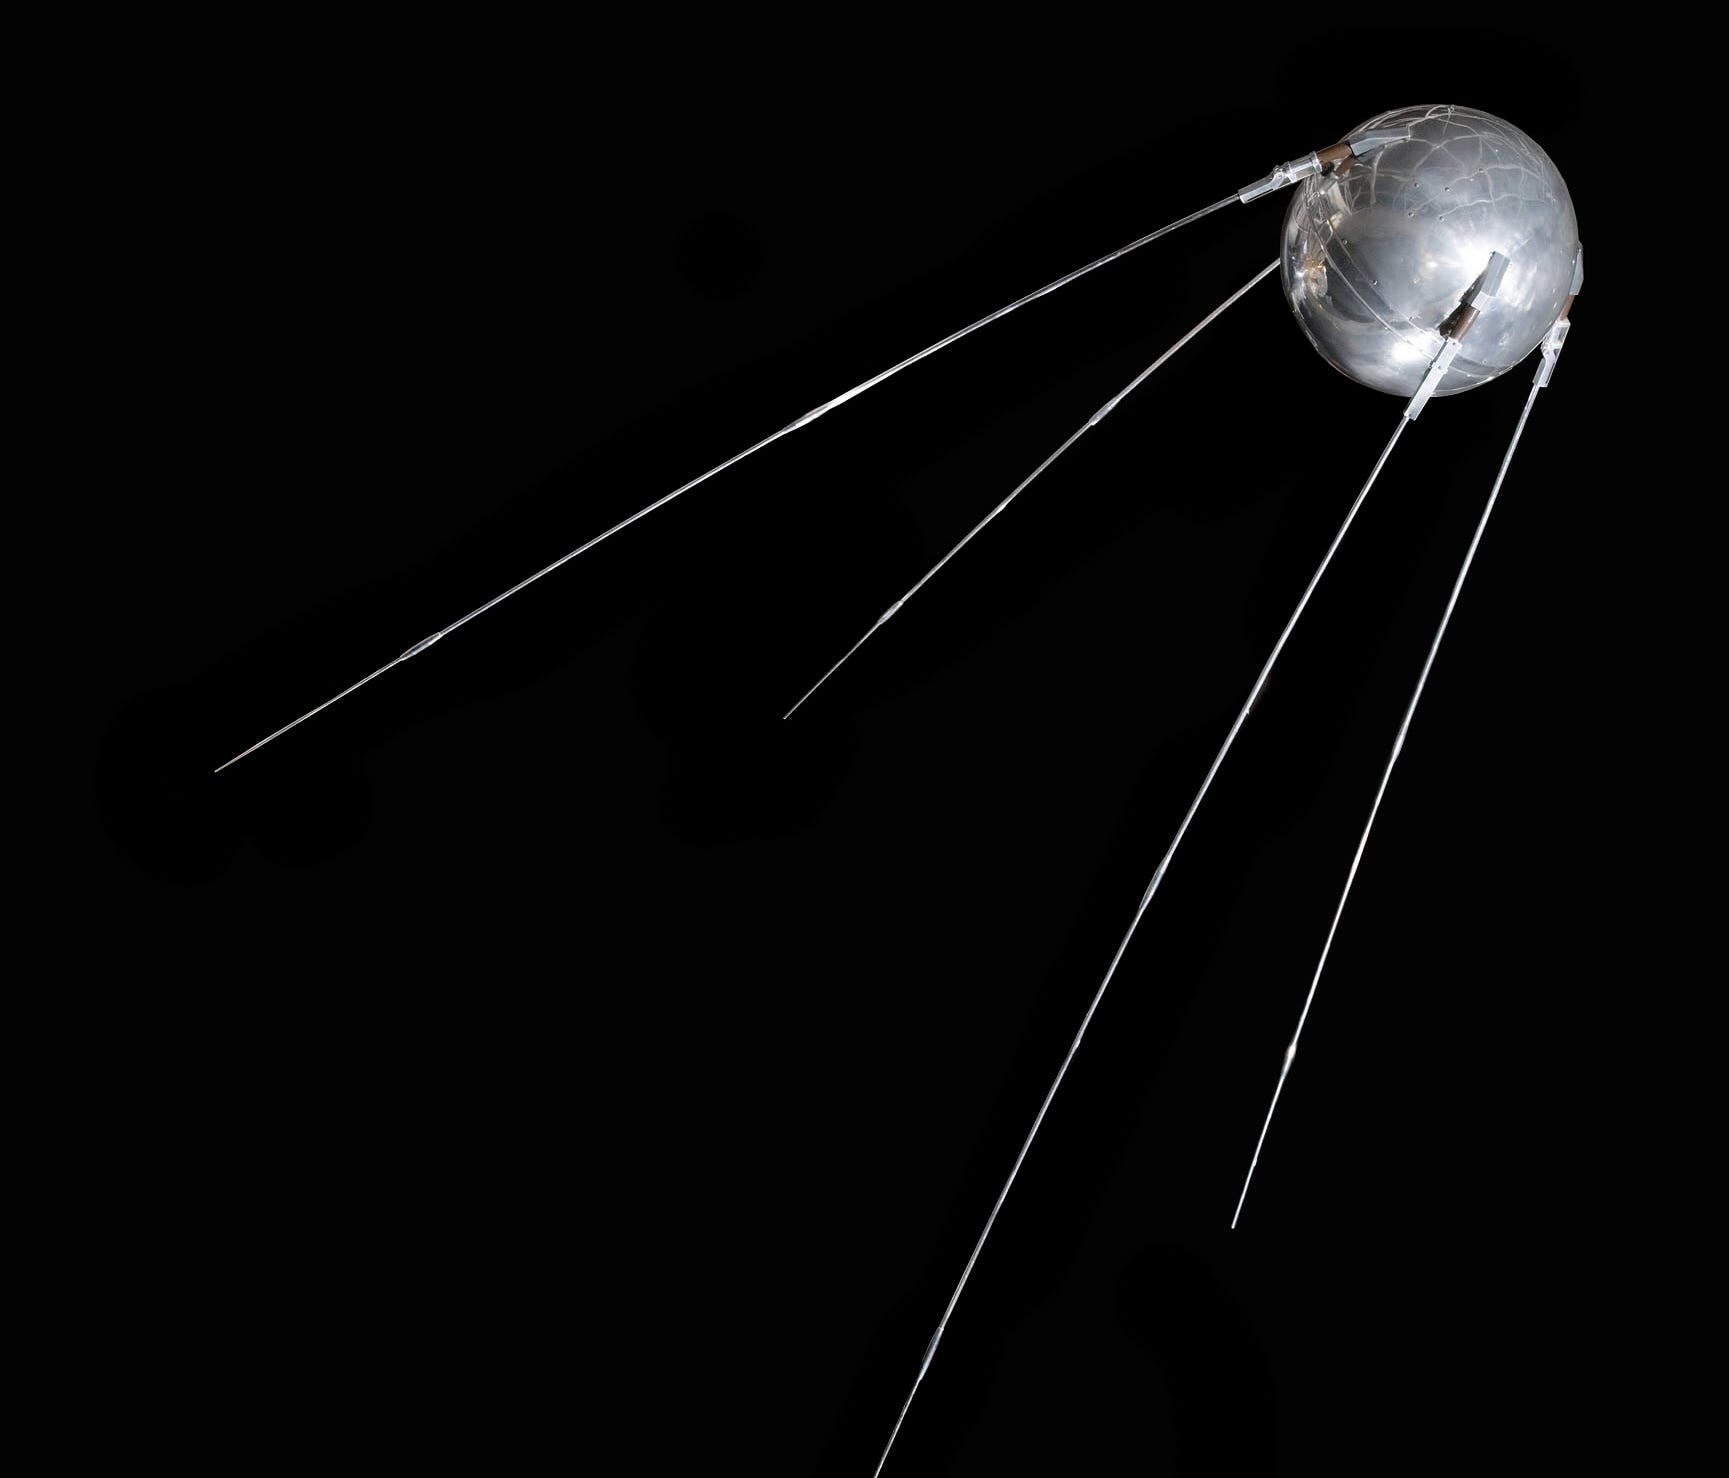 A model of Sputnik hangs at the National Air and Space Museum in Washington, D.C.